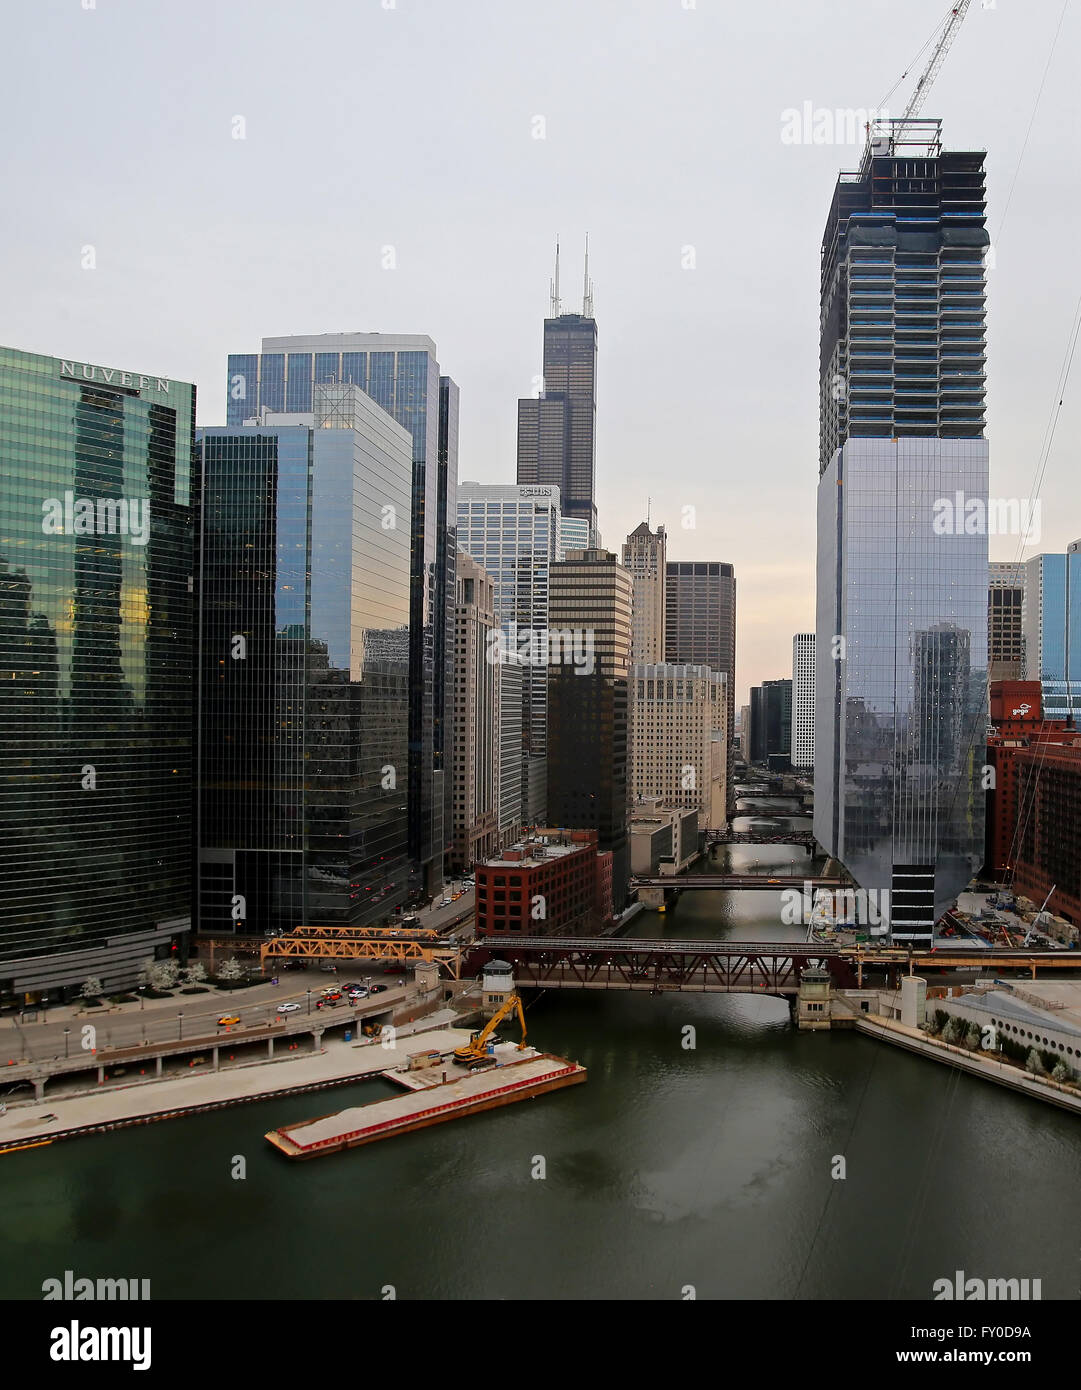 Downtown Chicago skyline including the Willis Tower and Chicago River as seen from the Holiday Inn at Merchandise Mart Stock Photo